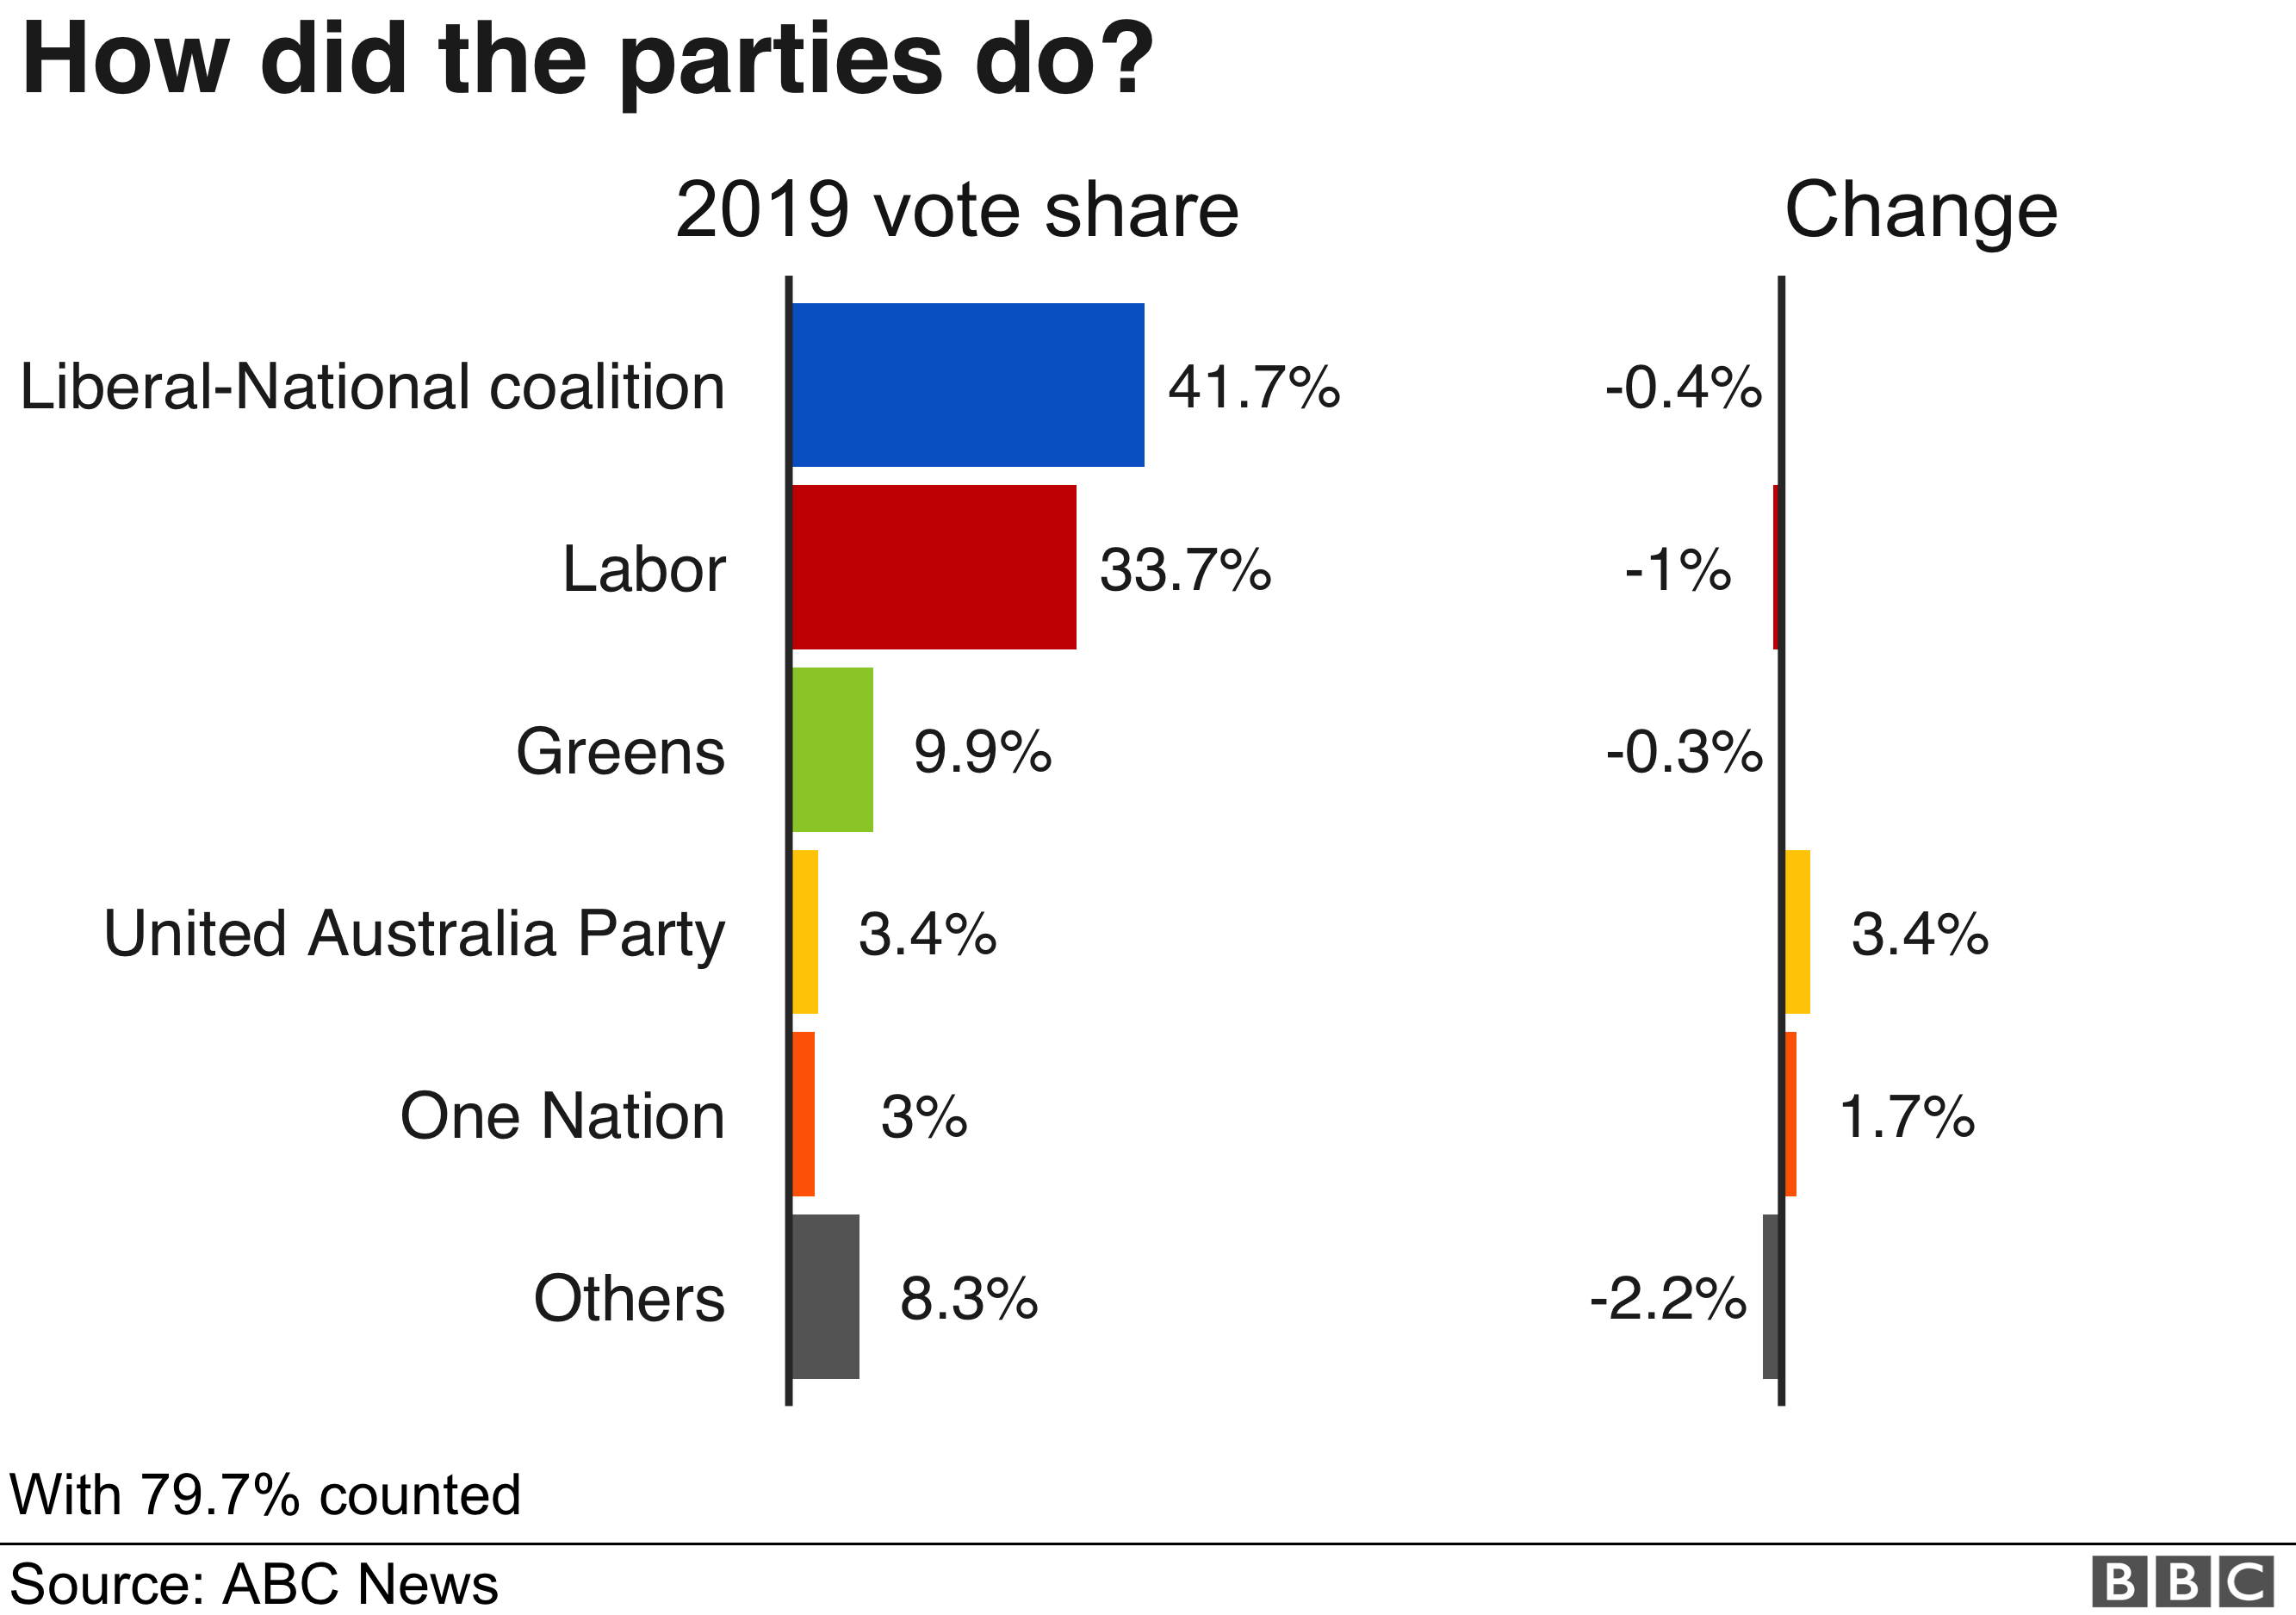 Graphic: Australian election results, vote percentages by party